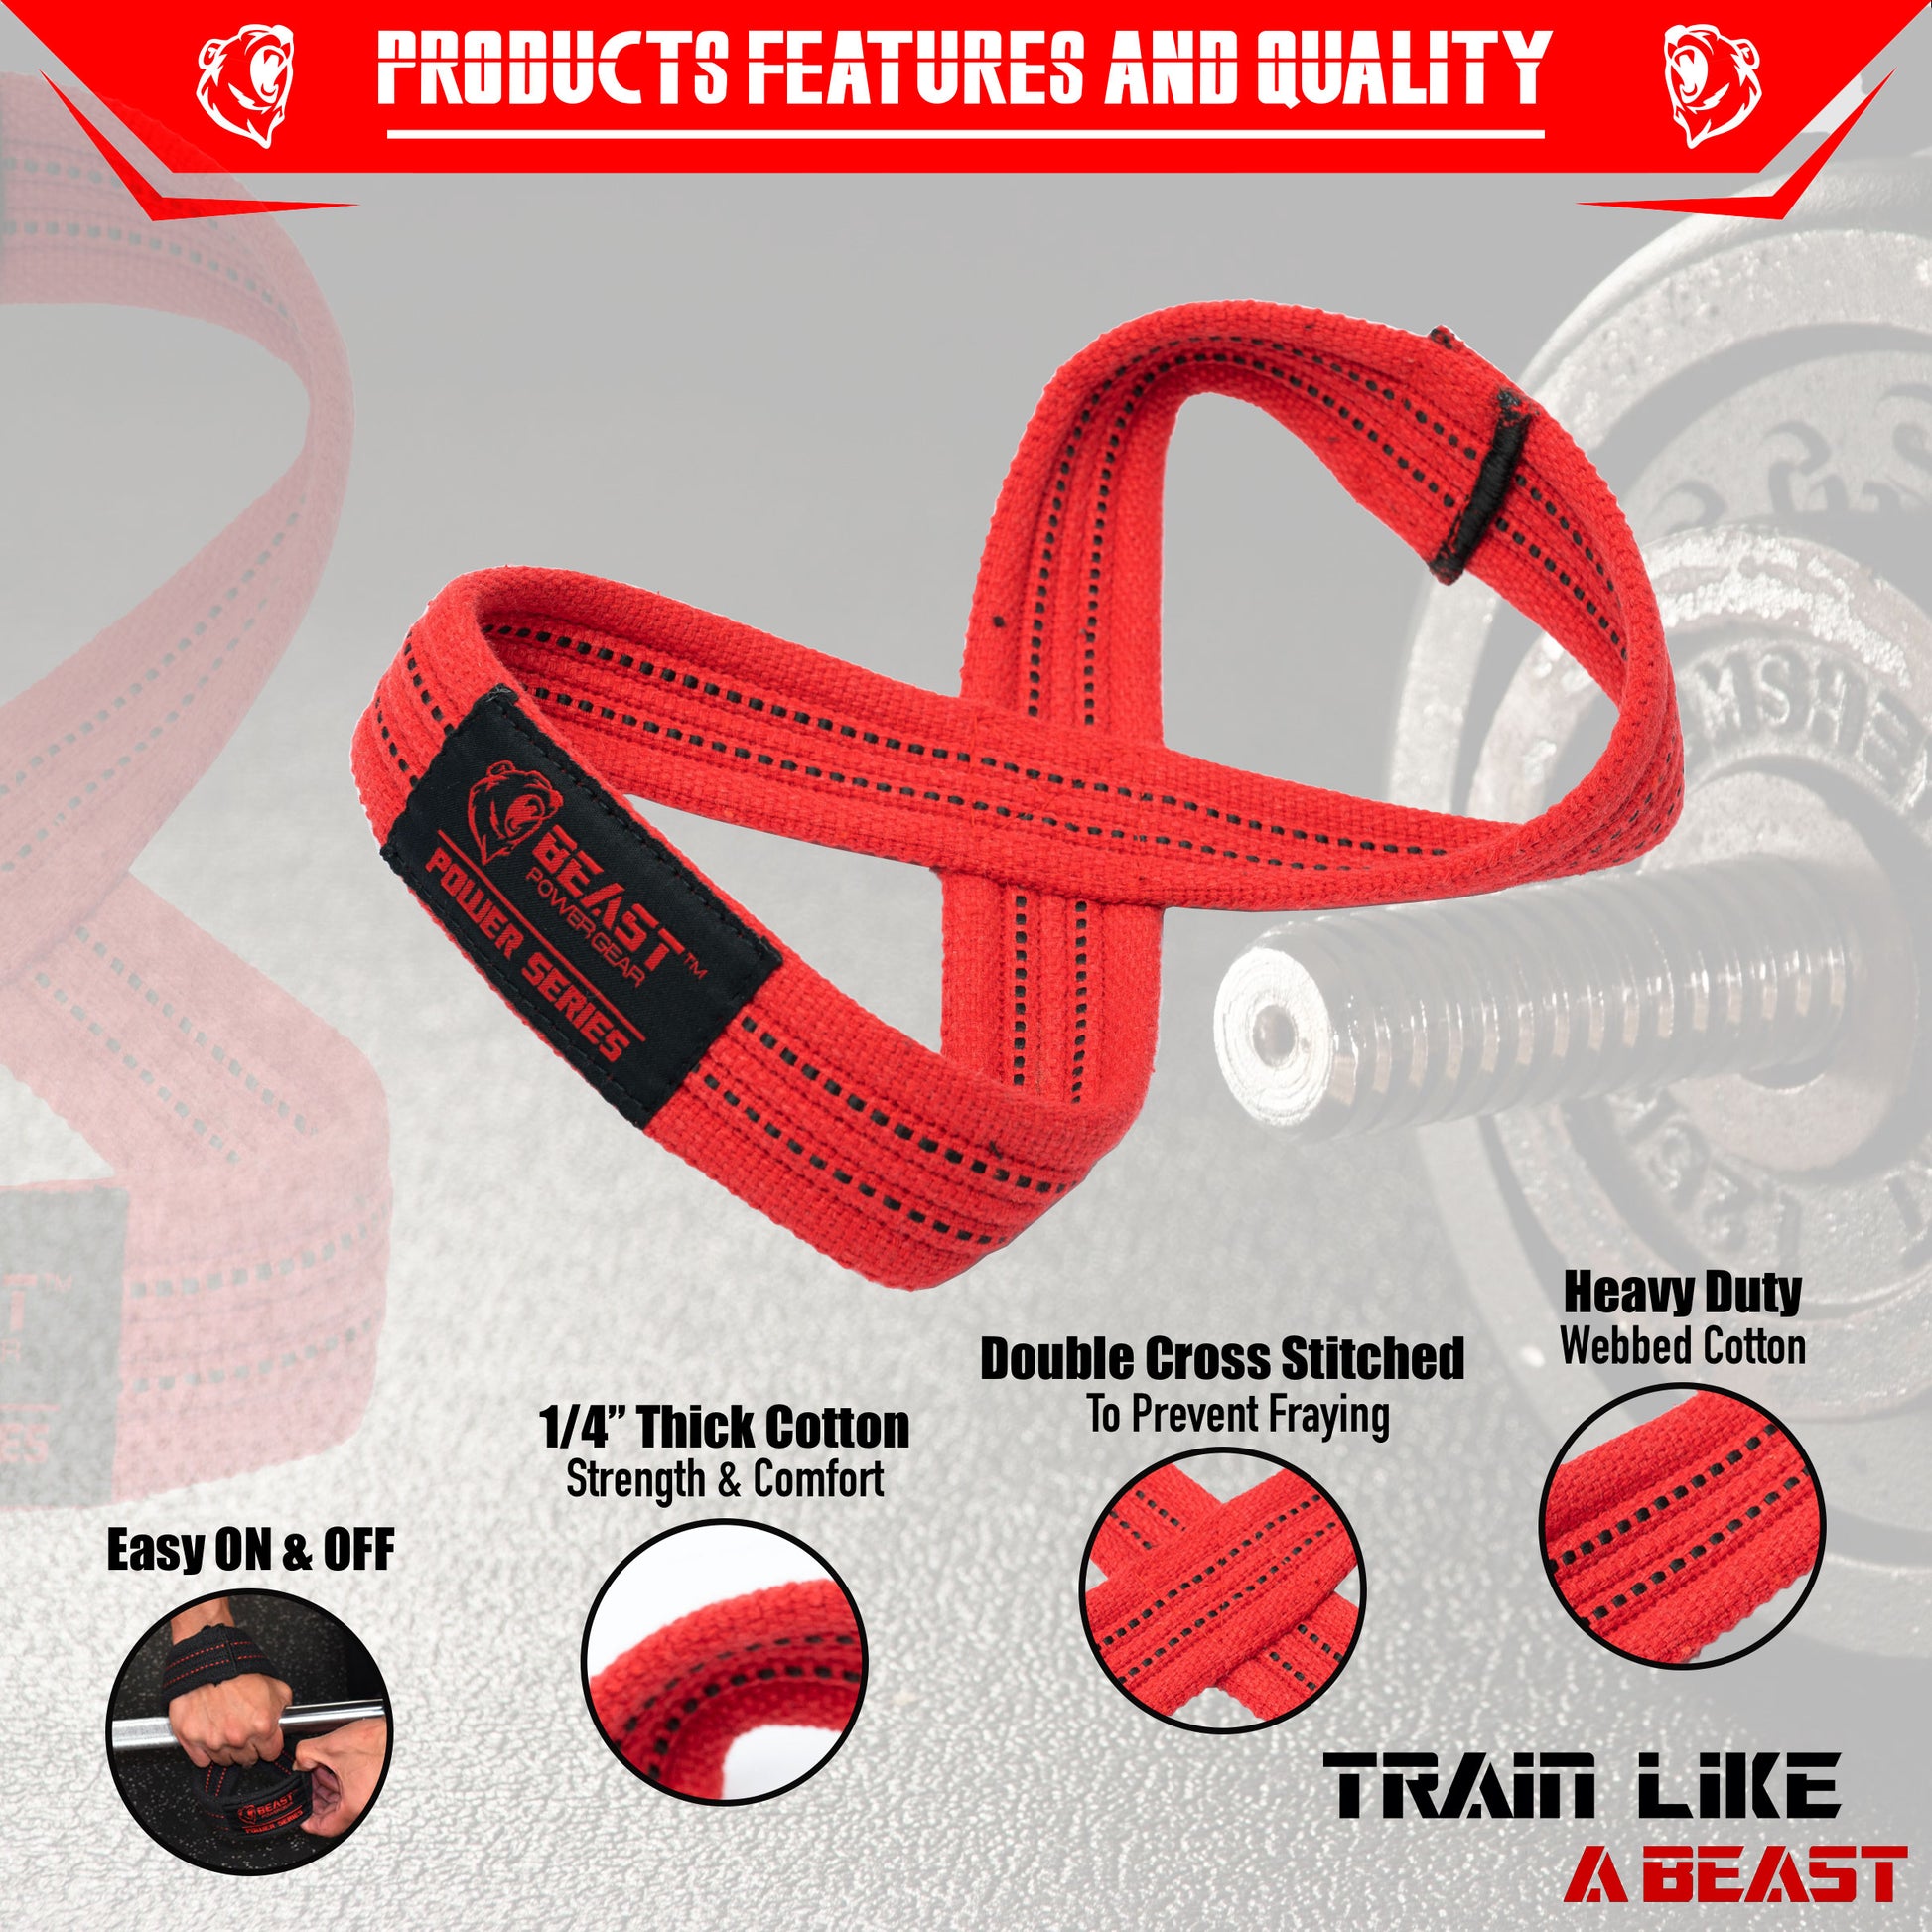 Giants Pro Figure of 8 Lifting Straps Review